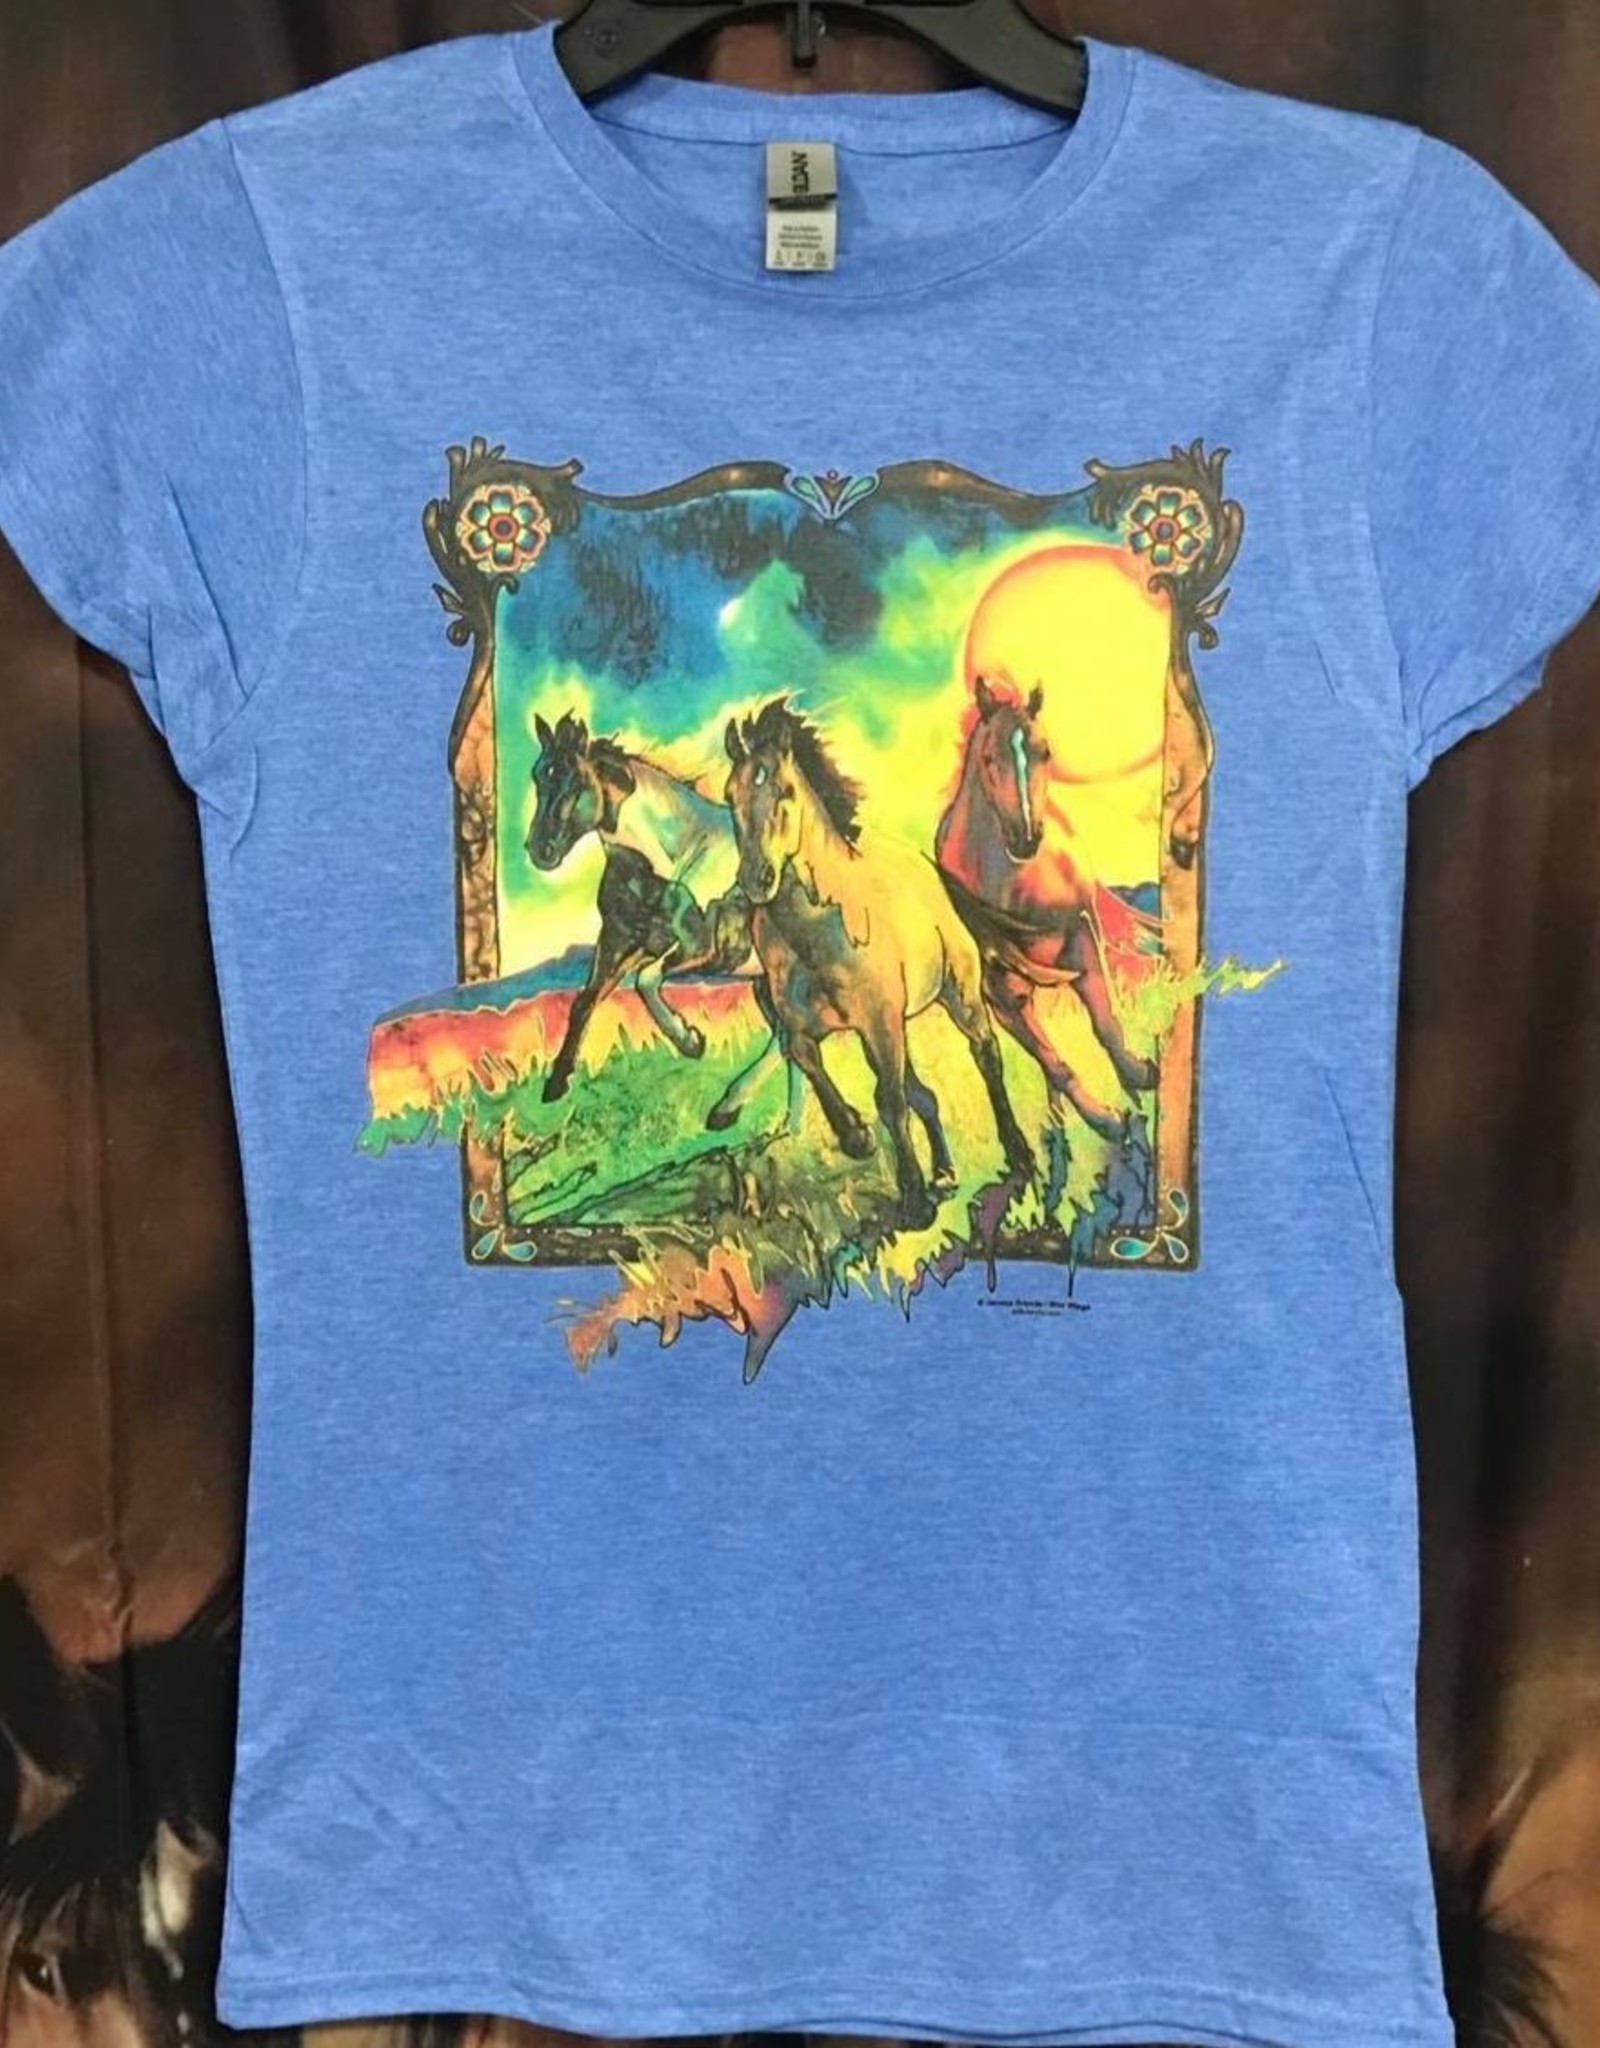 Colorful Running Horses Tee